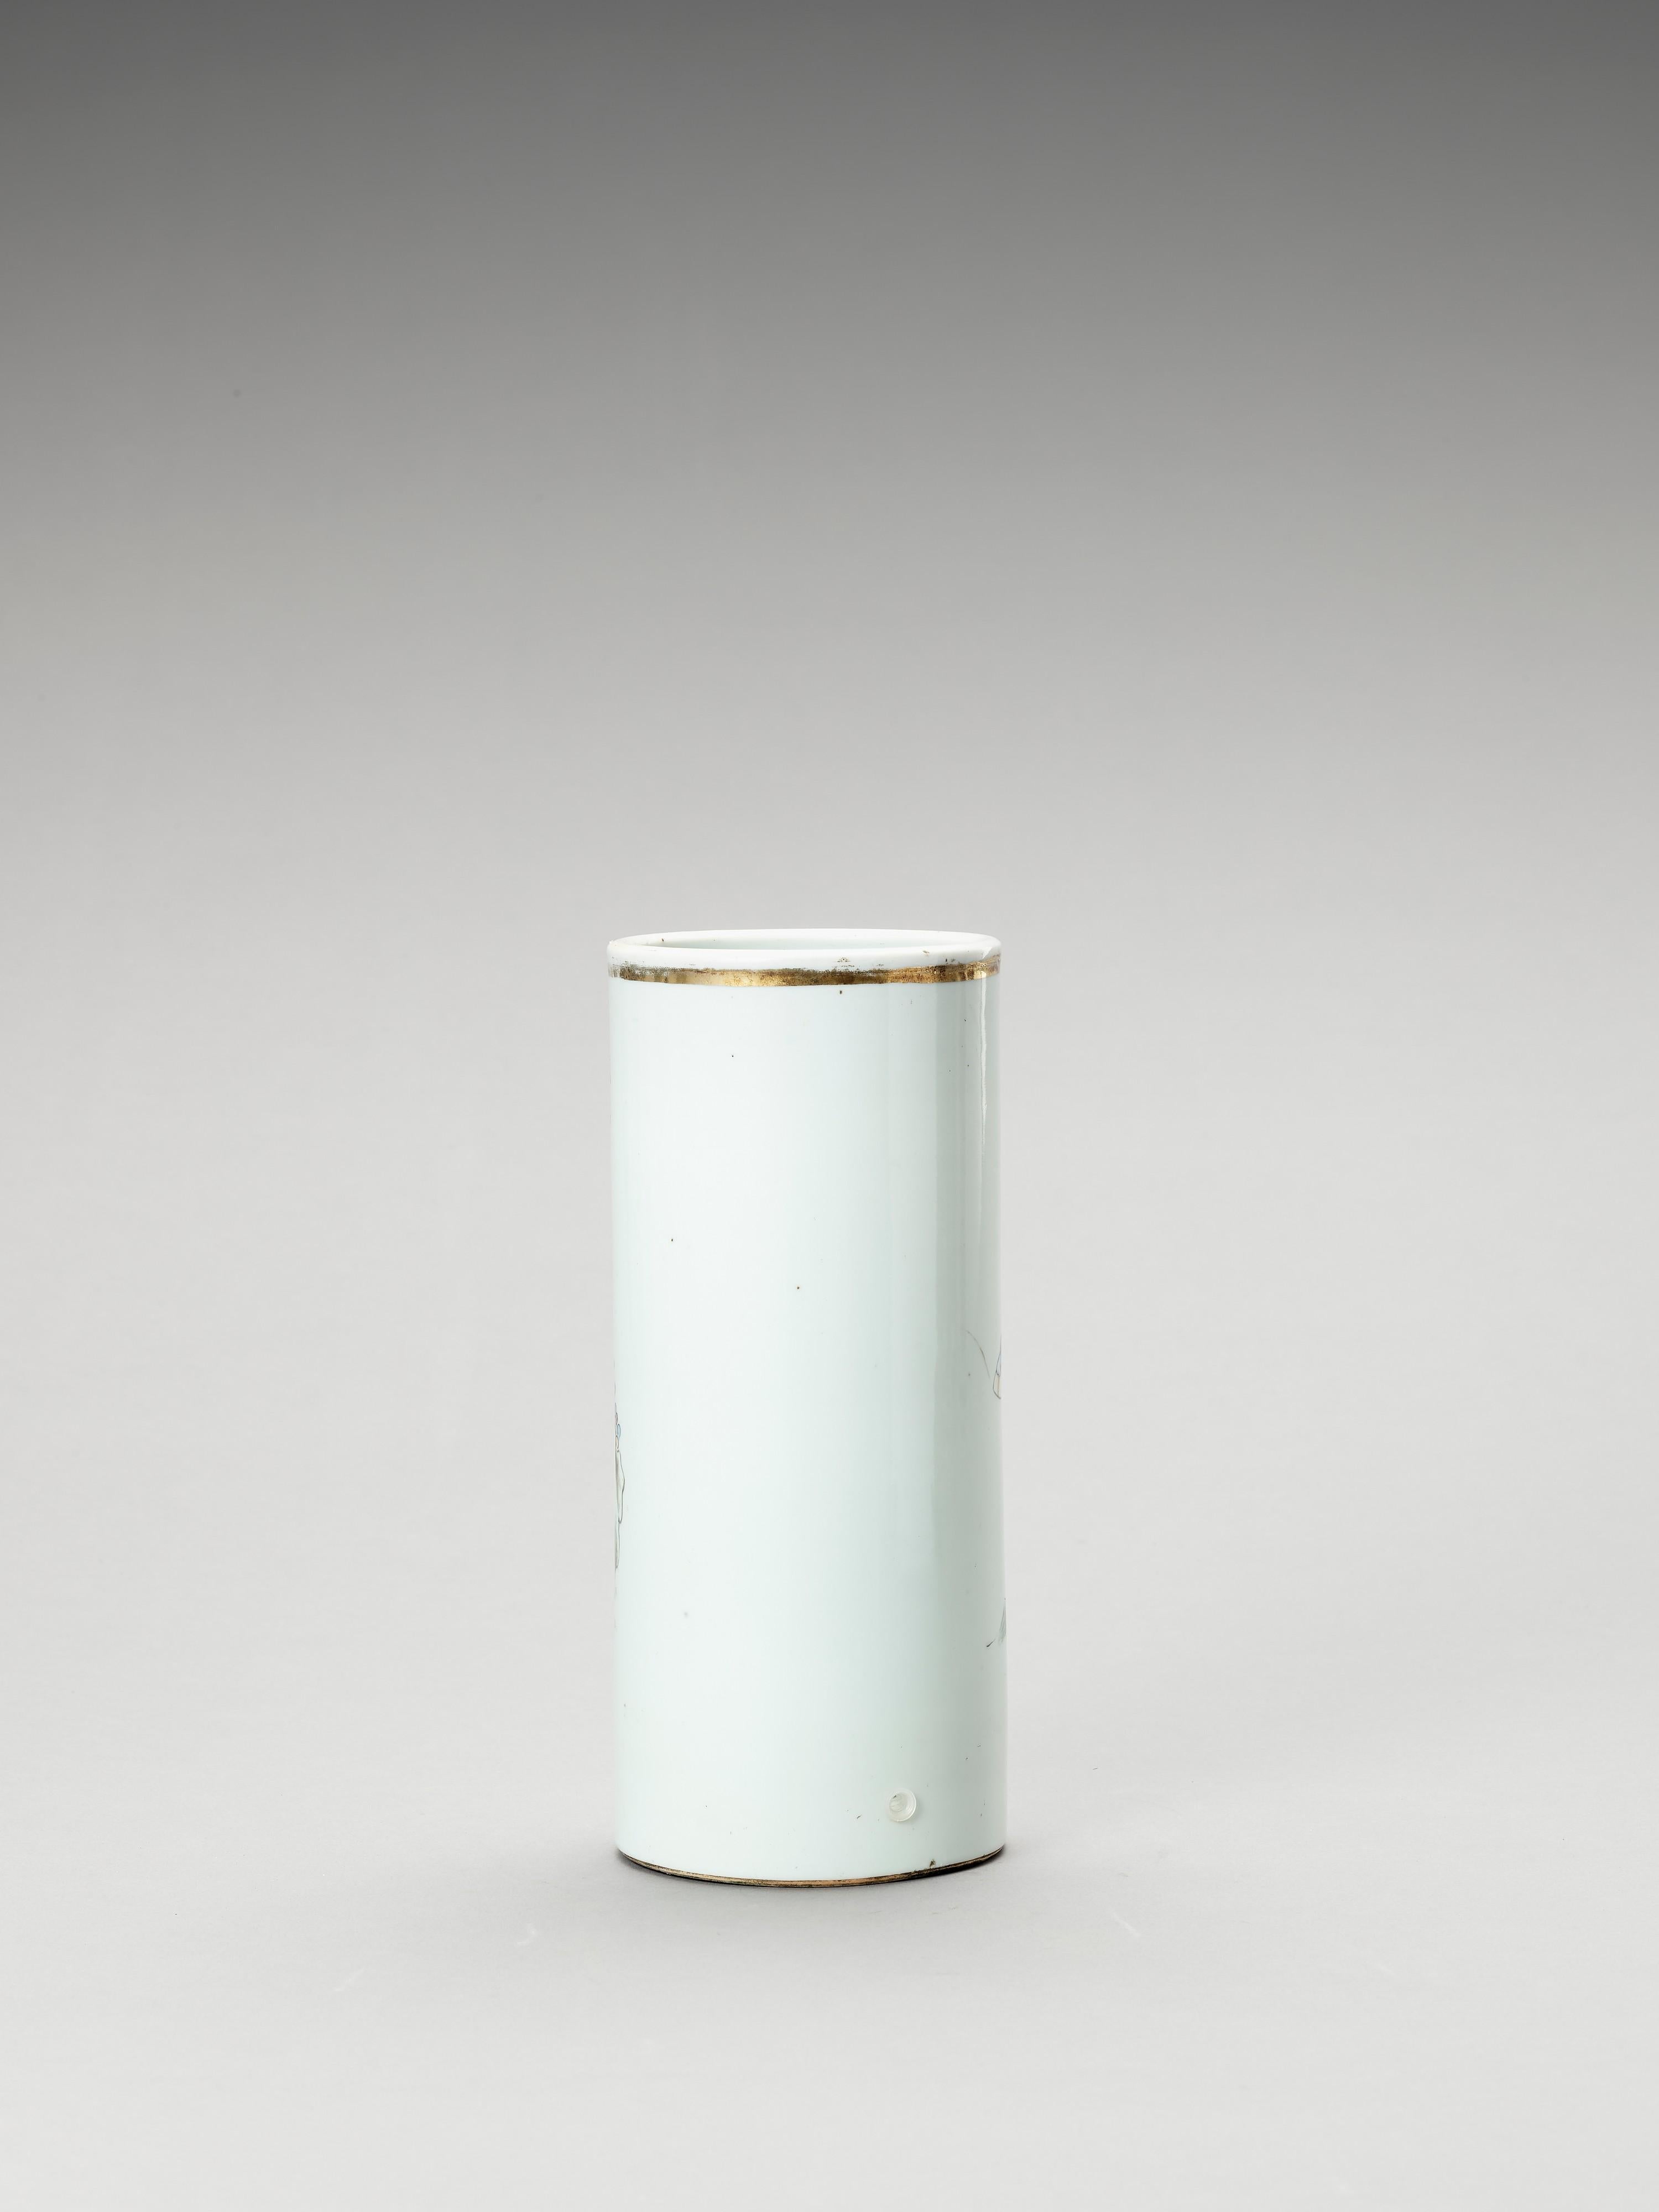 Chinese Enameled Cylindrical Porcelain Vase, Late Qing to Republic, 1900-1950 For Sale 2